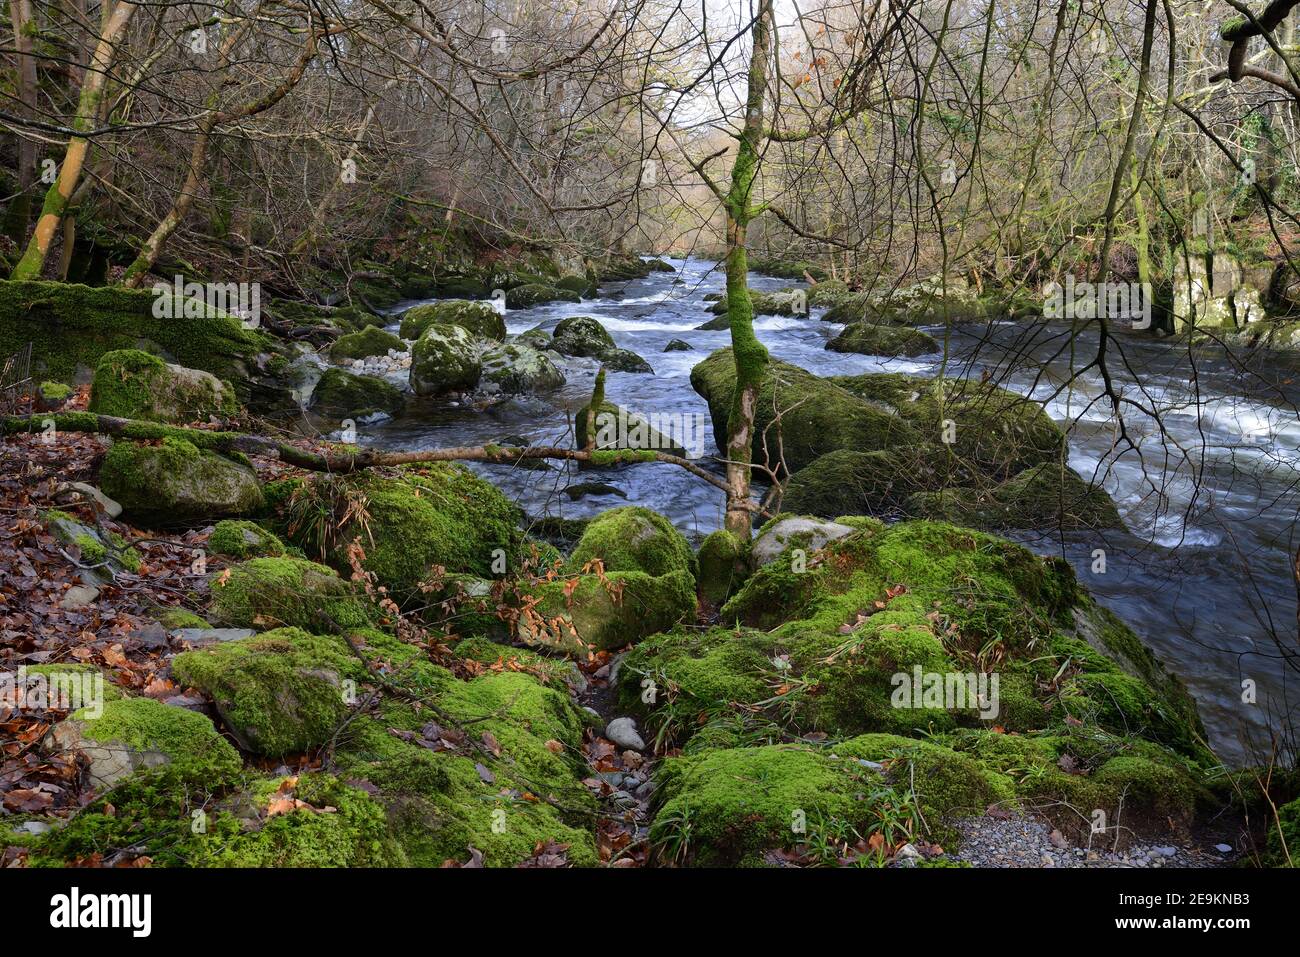 The Ogwen River has its main source in Lake Ogwen in Snowdonia but is seen here as it passes through a wooded valley in its lower reaches. Stock Photo